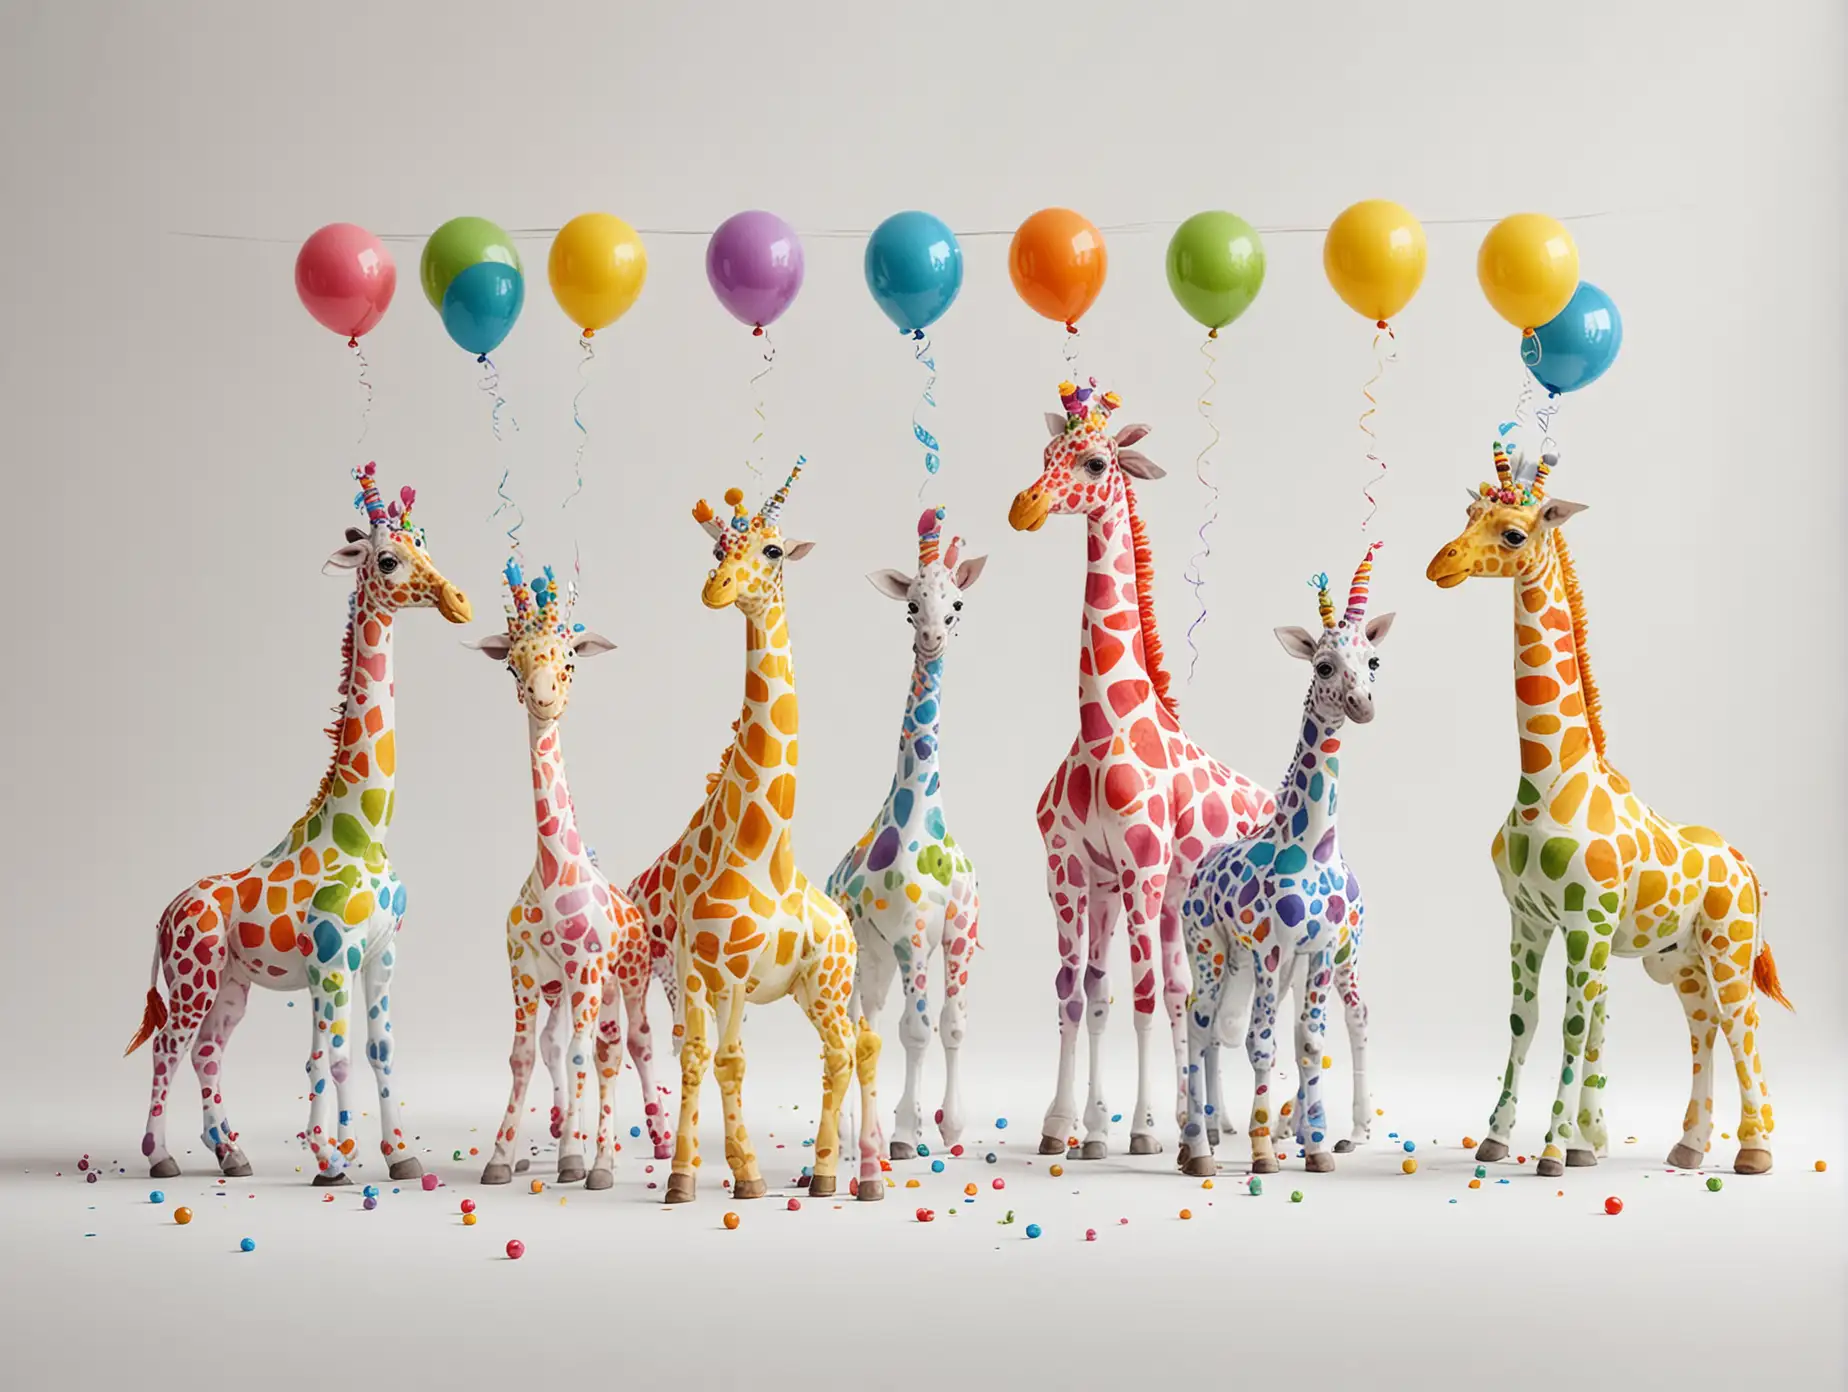 Colorful Cartoon Giraffes at a Birthday Party on White Background